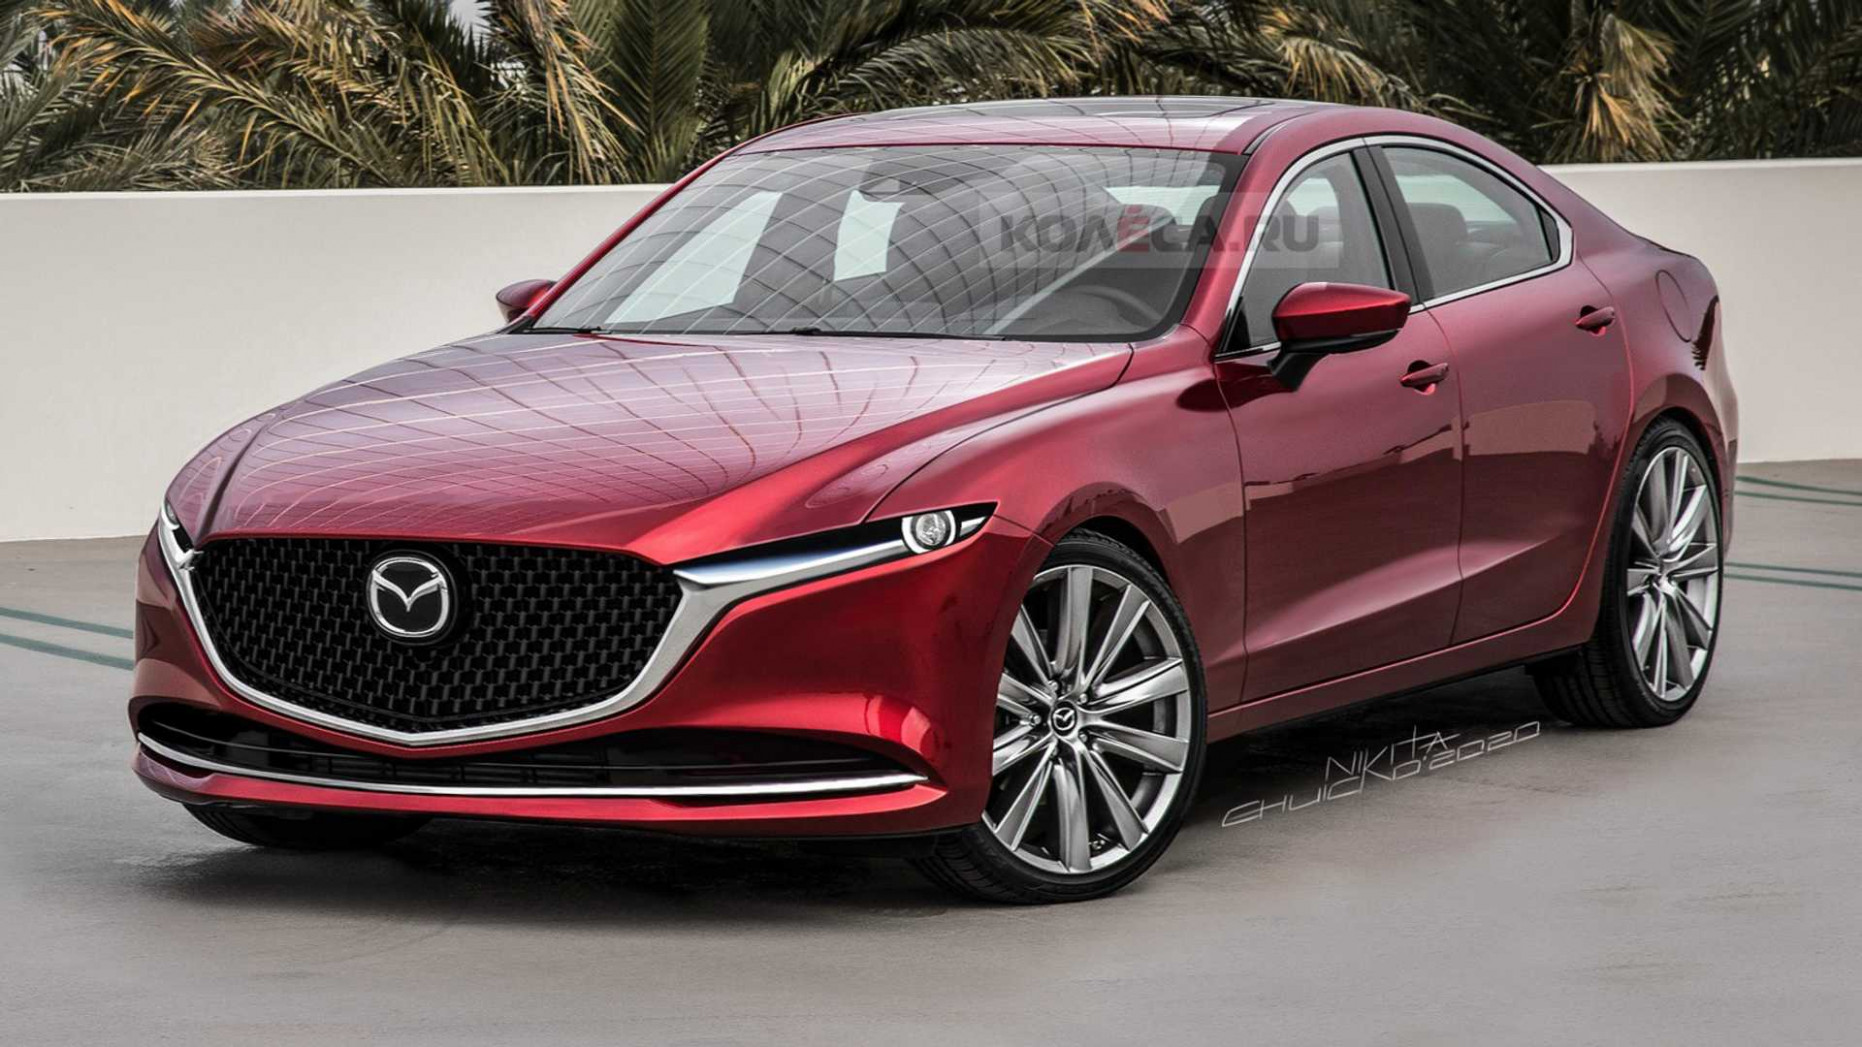 Release Date and Concept When Is The 2022 Mazda 6 Coming Out